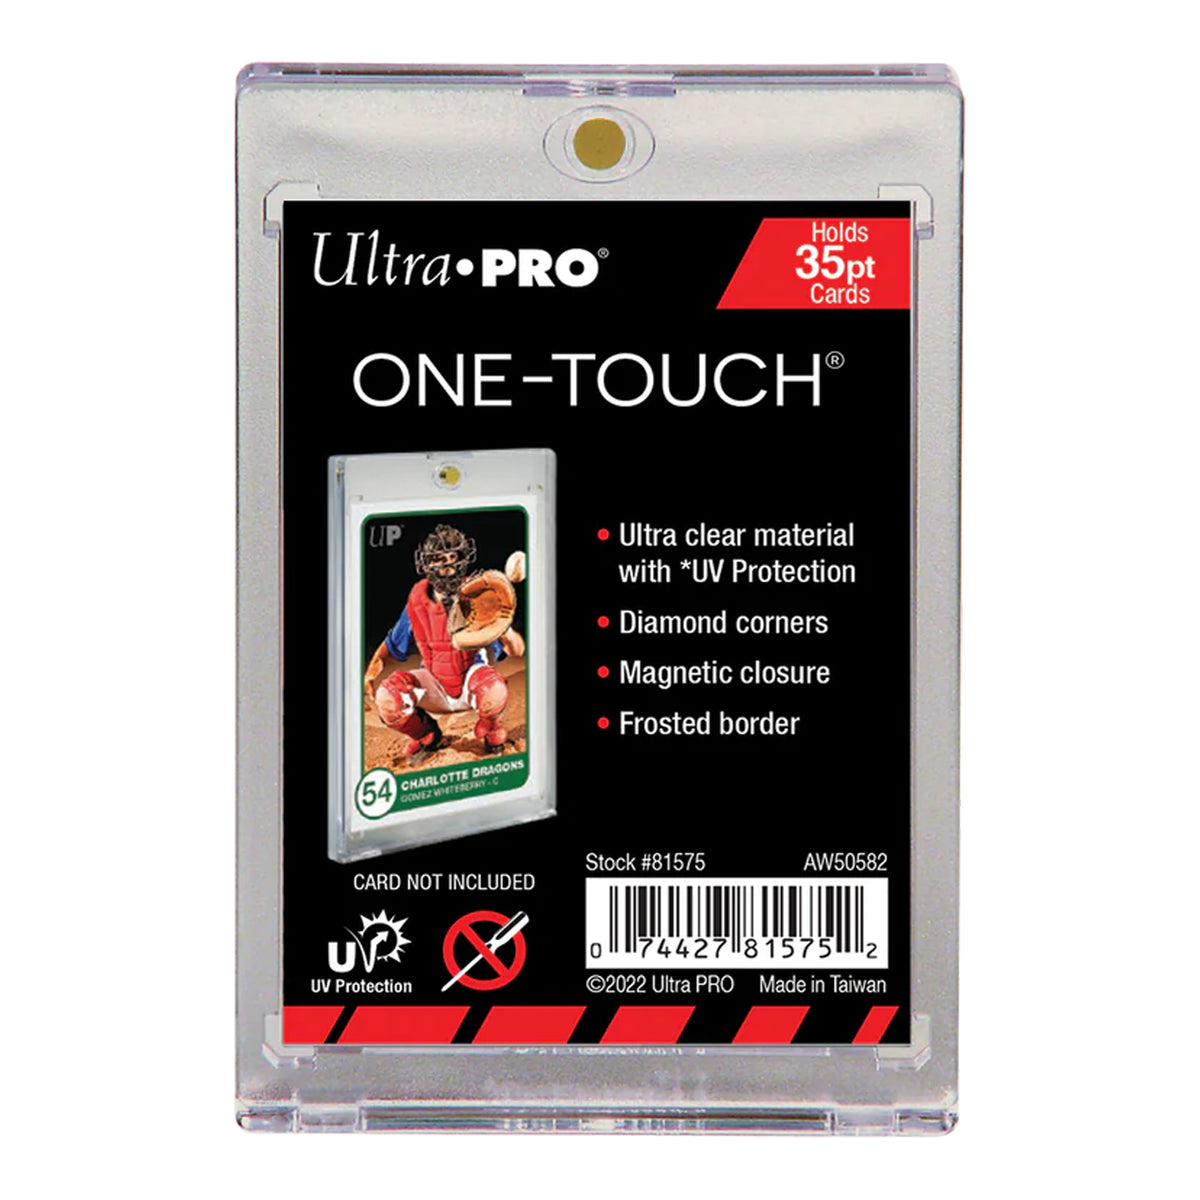 Ultra Pro 35pt Transparent UV One-Touch Magnetic Holder